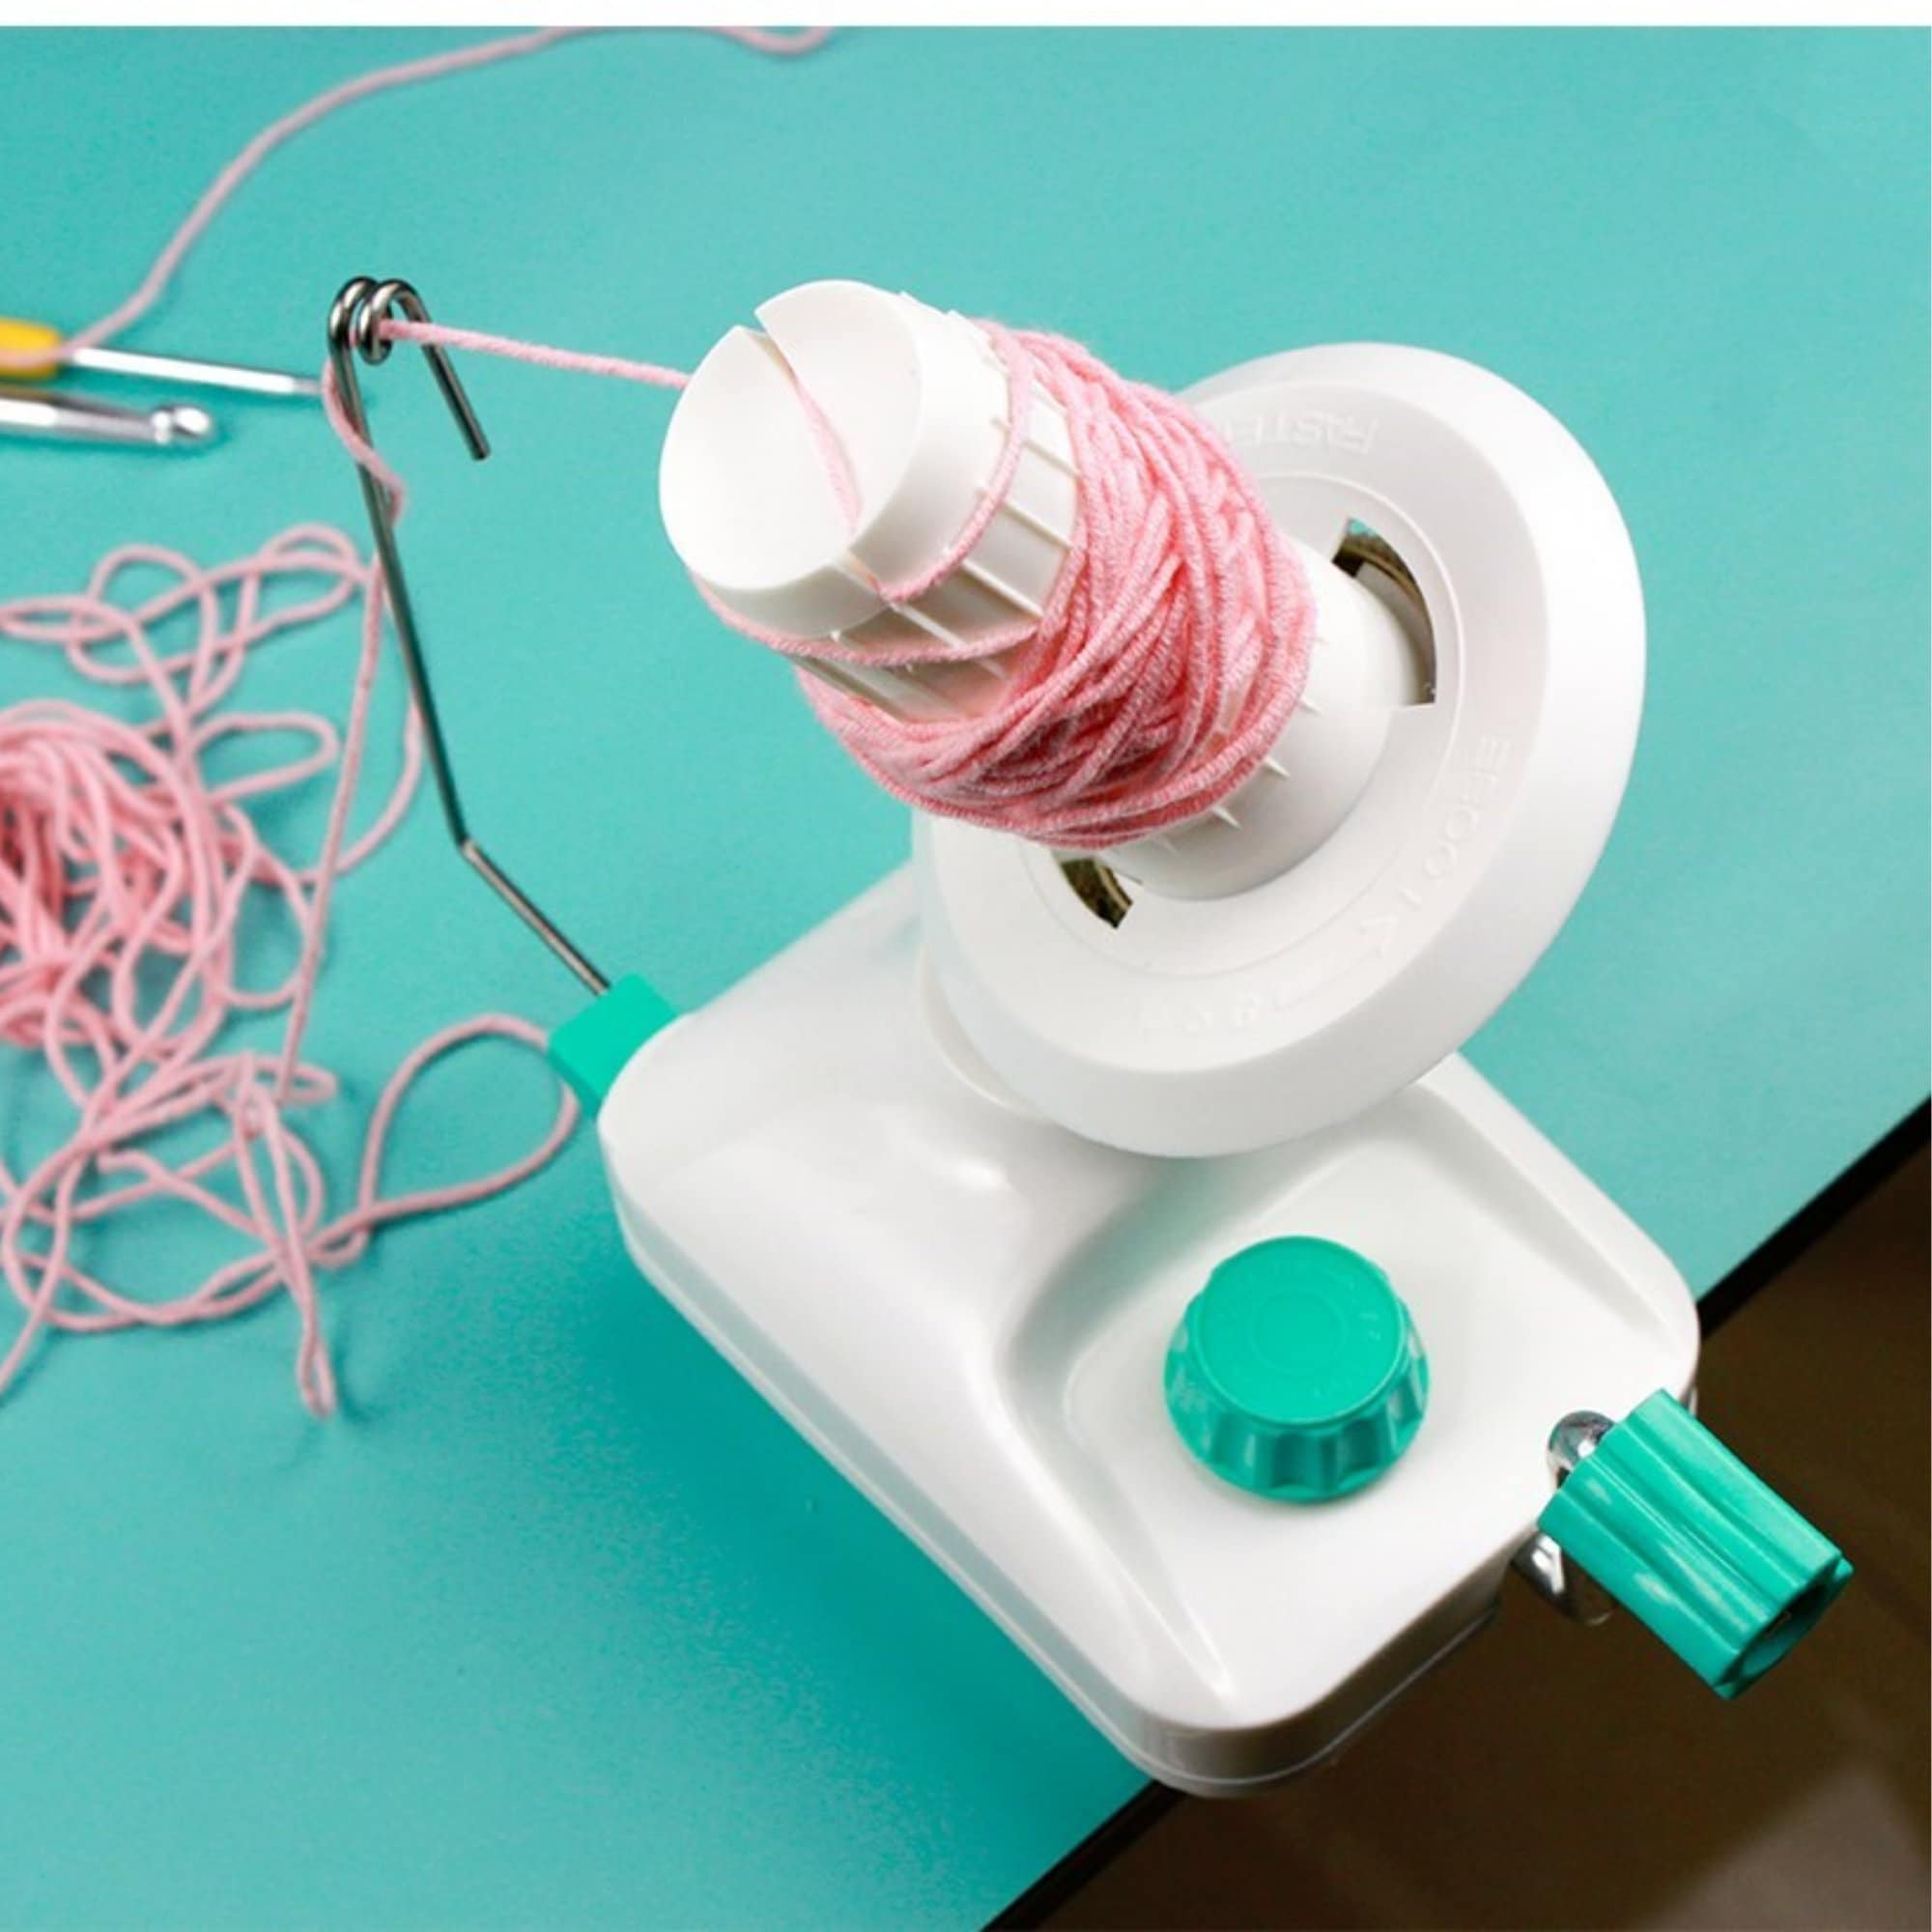 Hand Operated Wool Yarn Winder For Knitting And Crocheting Manual